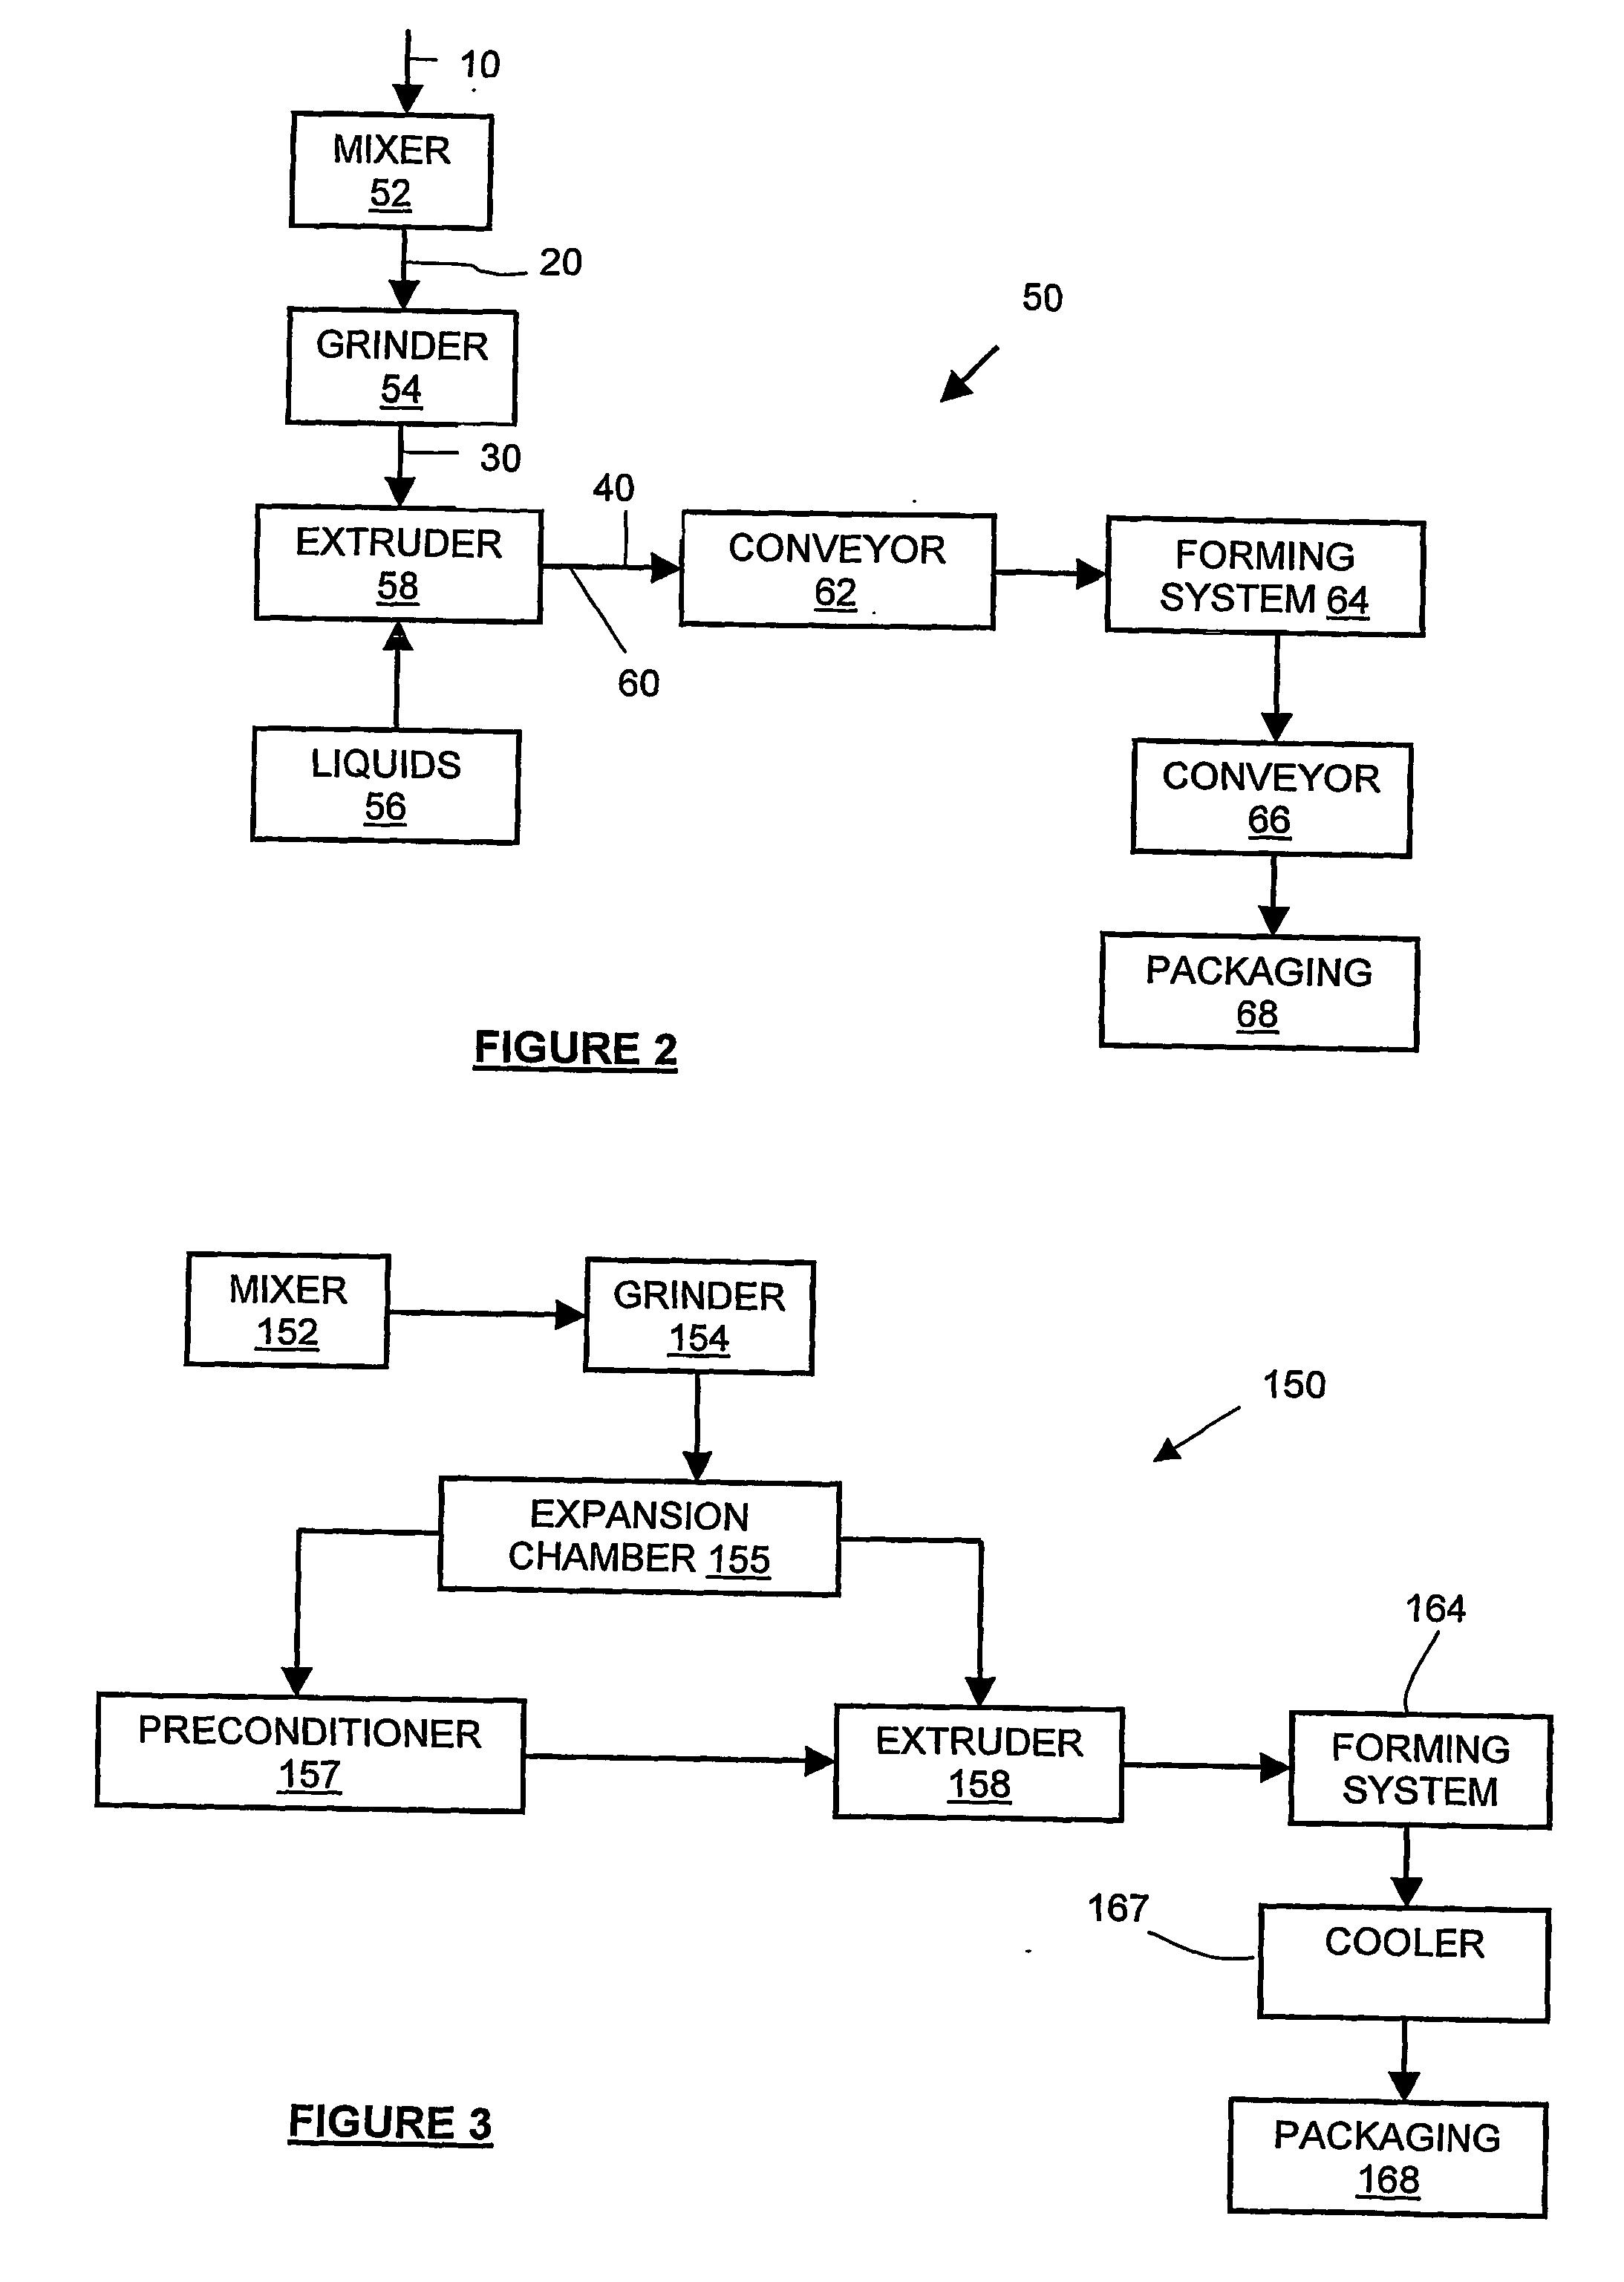 Use of expanded constituents and manufacture of products therefrom